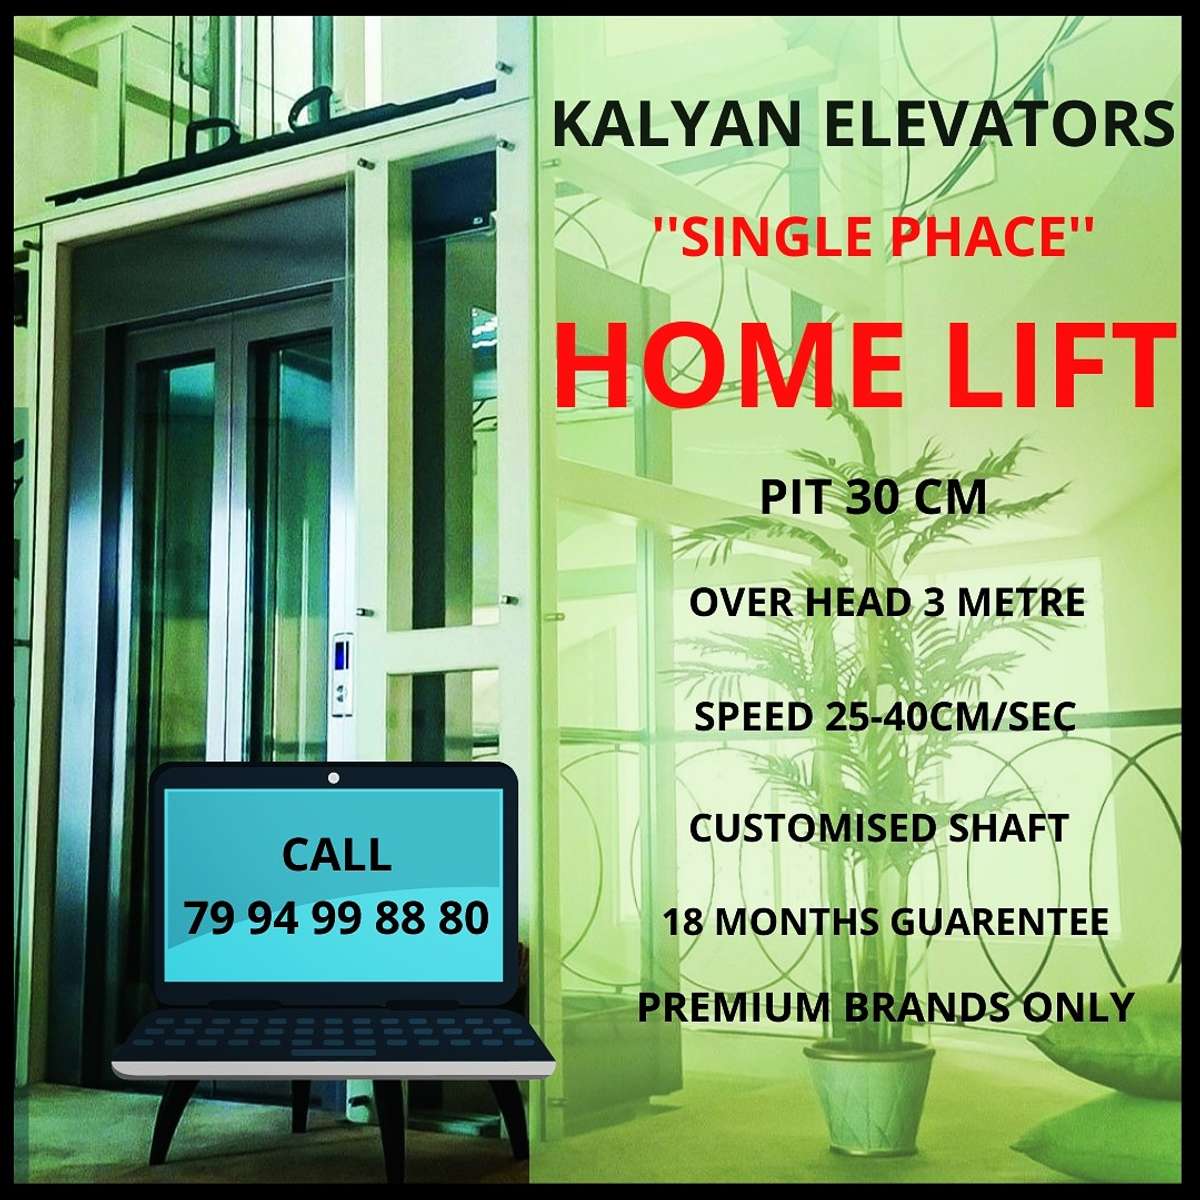 Kalyan Home Elevators offers the long-awaited solution to vertical mobility within homes at affordable prices and easy-to-use features. Our customized and aesthetically designed home lifts are easily installable in preexisting homes as well as houses under construction, and help you relieve the headache of climbing. More details:- call......

we do all kind of :-
Home Lifts
Hospital Lifts
Capsule Lifts
Commercial Lifts
Customised Passenger Lifts
Car Lifts
Parking Lifts